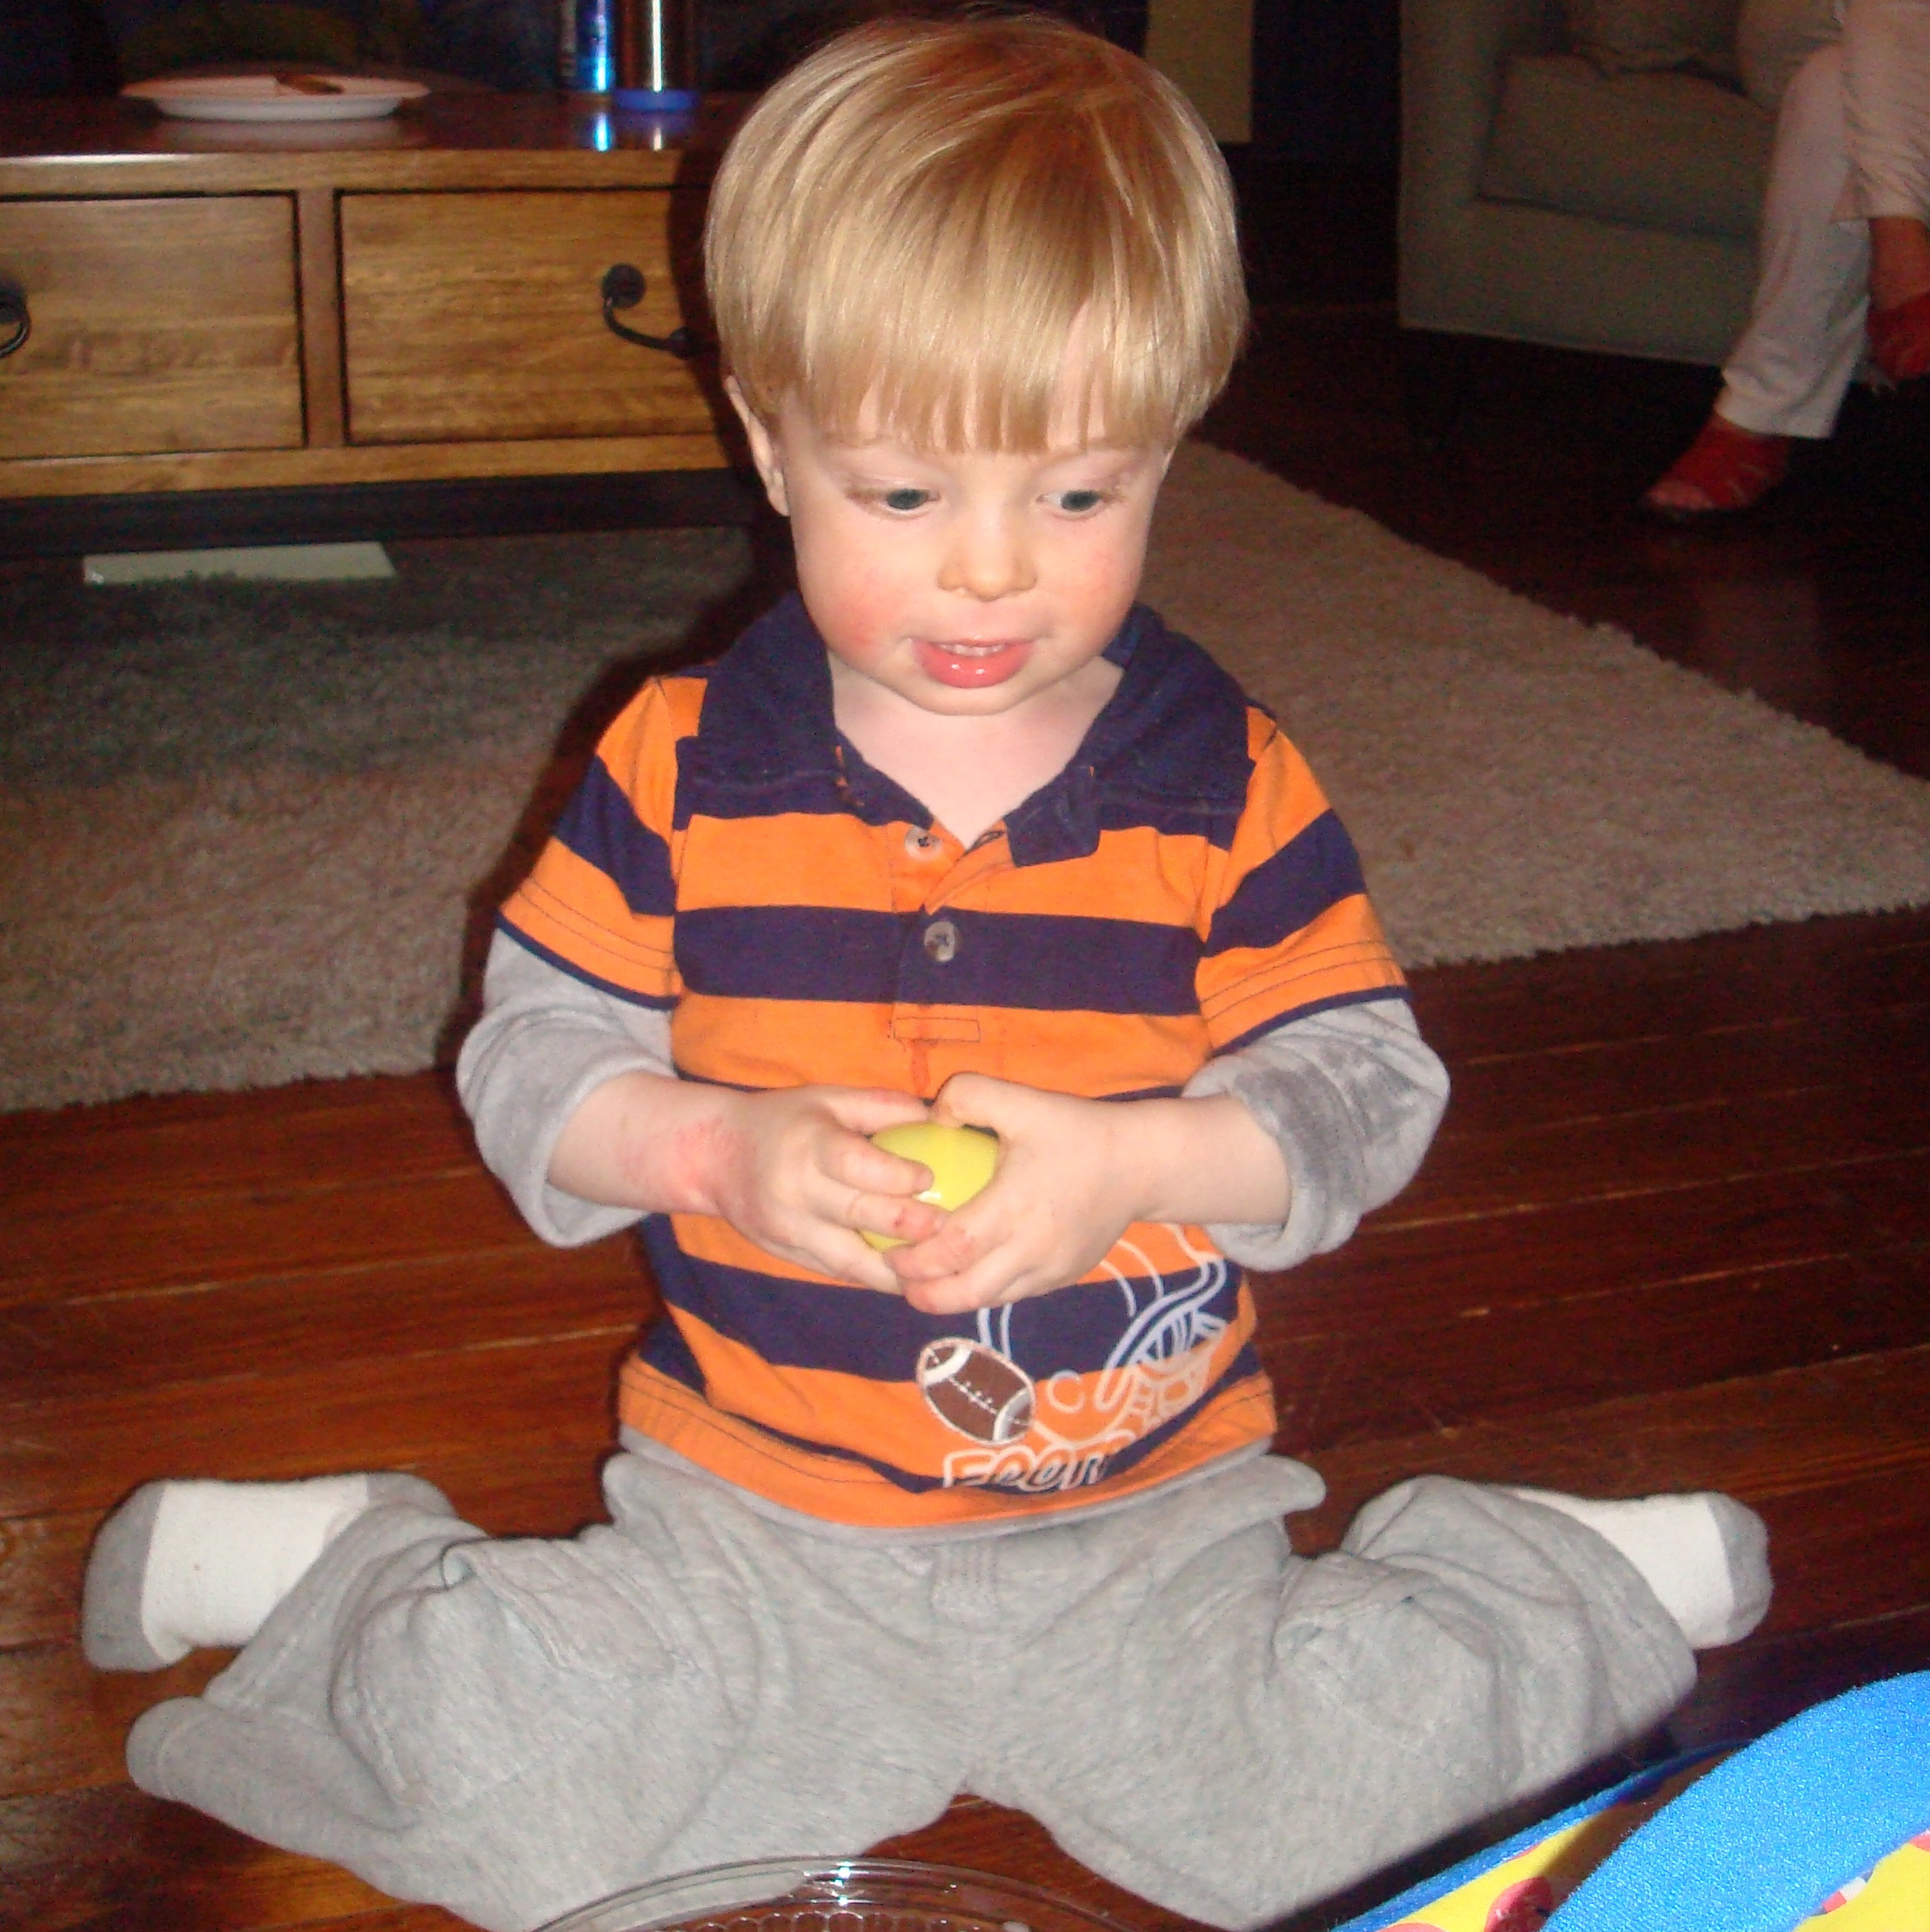 When a child w-sits he spreads his hips with his bottom on the floor, his knees bent, and his feet behind him, making a "W" shape with his legs. 